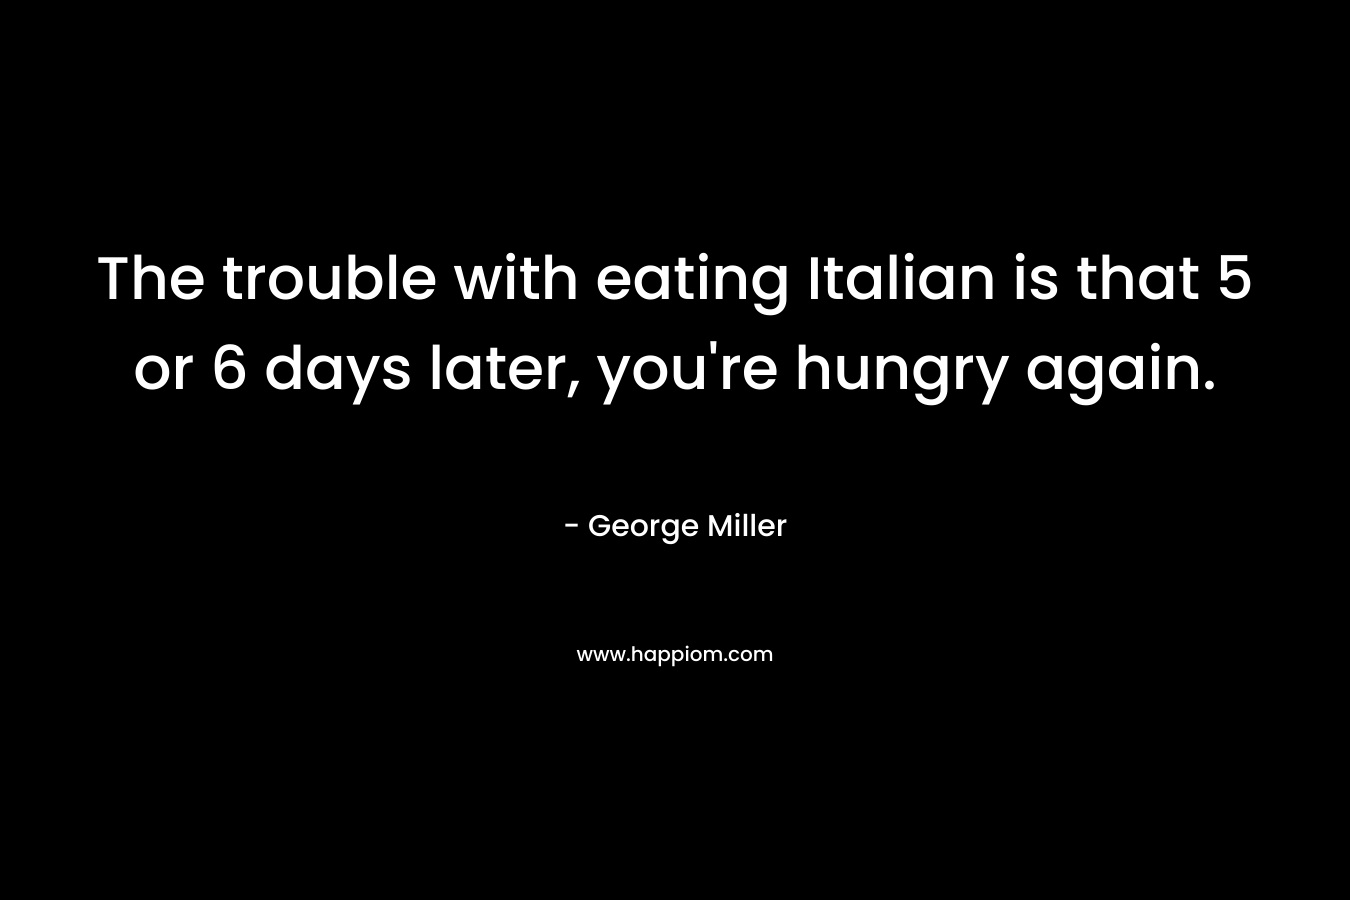 The trouble with eating Italian is that 5 or 6 days later, you're hungry again.